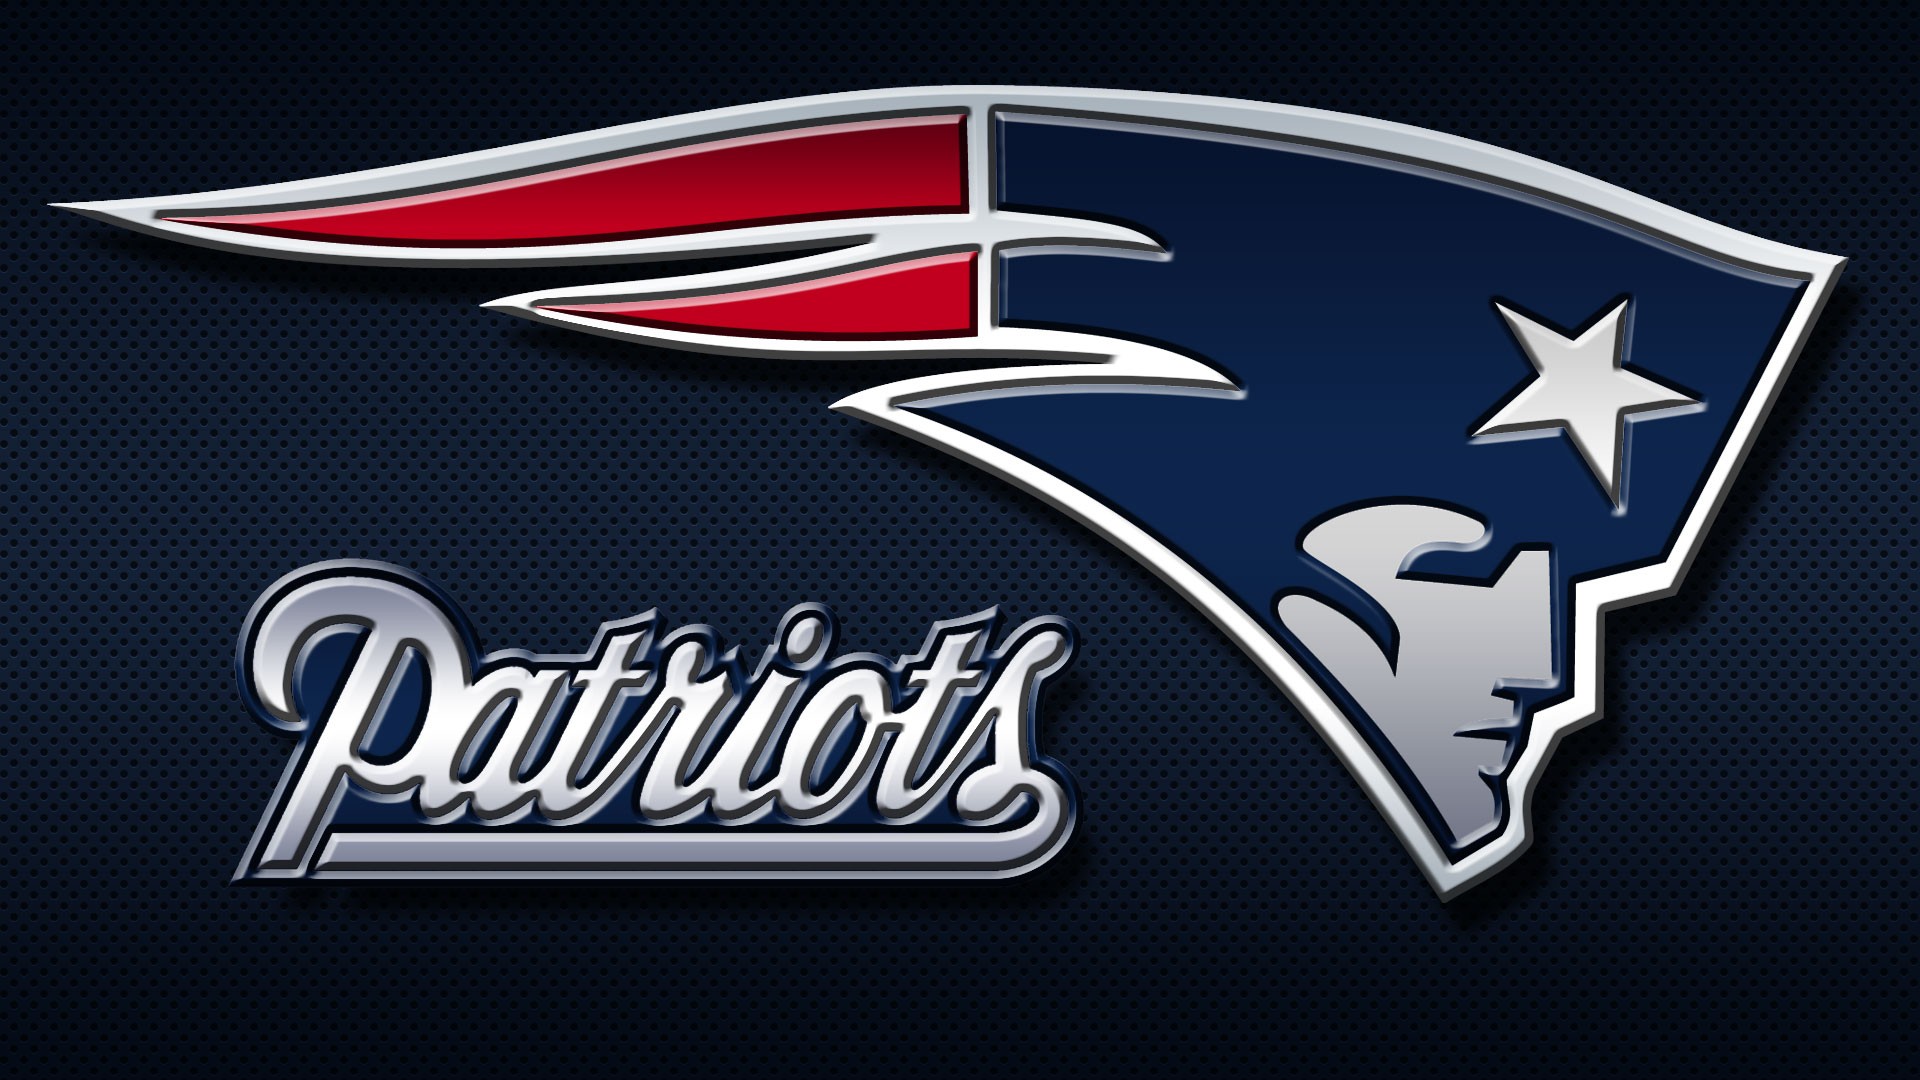 HD New England Patriots Wallpapers With Resolution 1920X1080 pixel. You can make this wallpaper for your Mac or Windows Desktop Background, iPhone, Android or Tablet and another Smartphone device for free